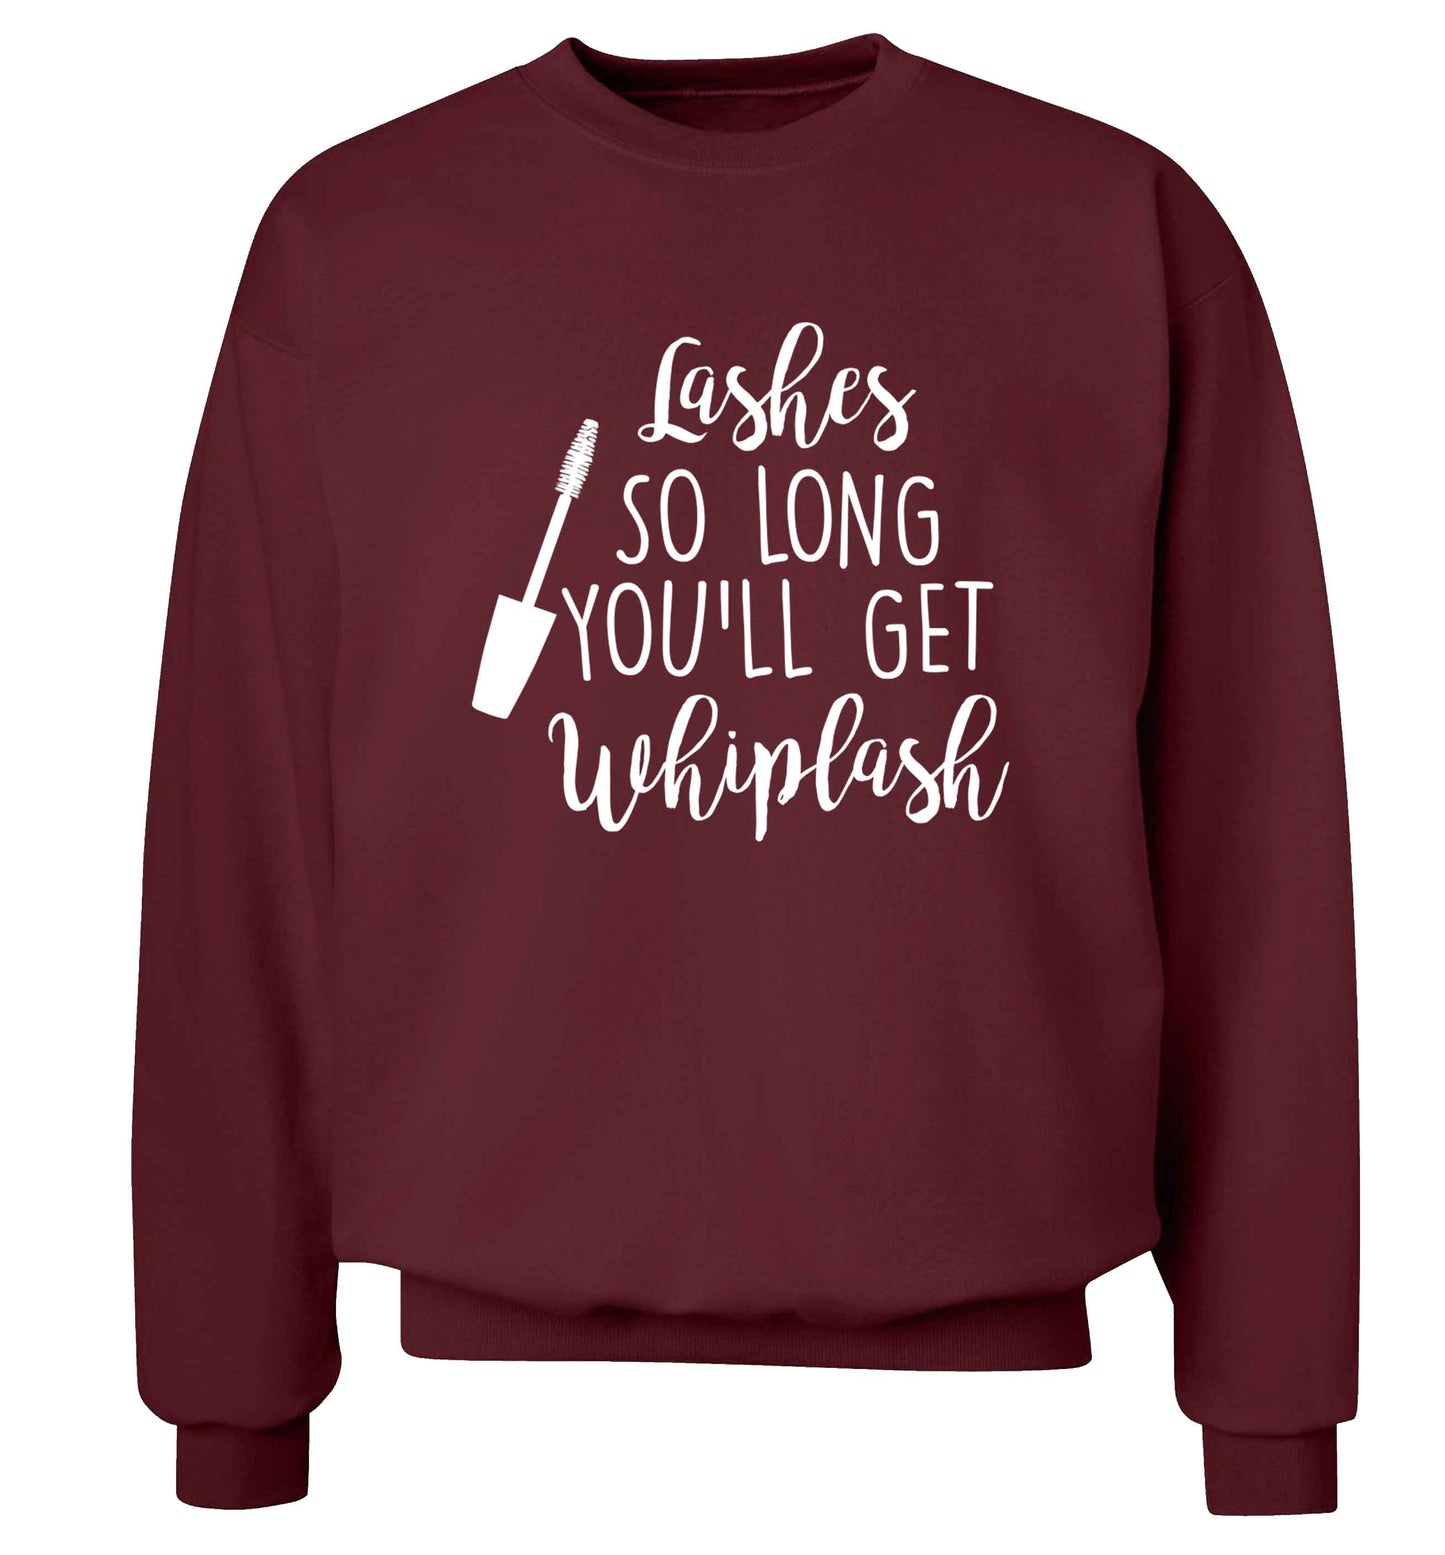 Lashes so long you'll get whiplash Adult's unisex maroon Sweater 2XL